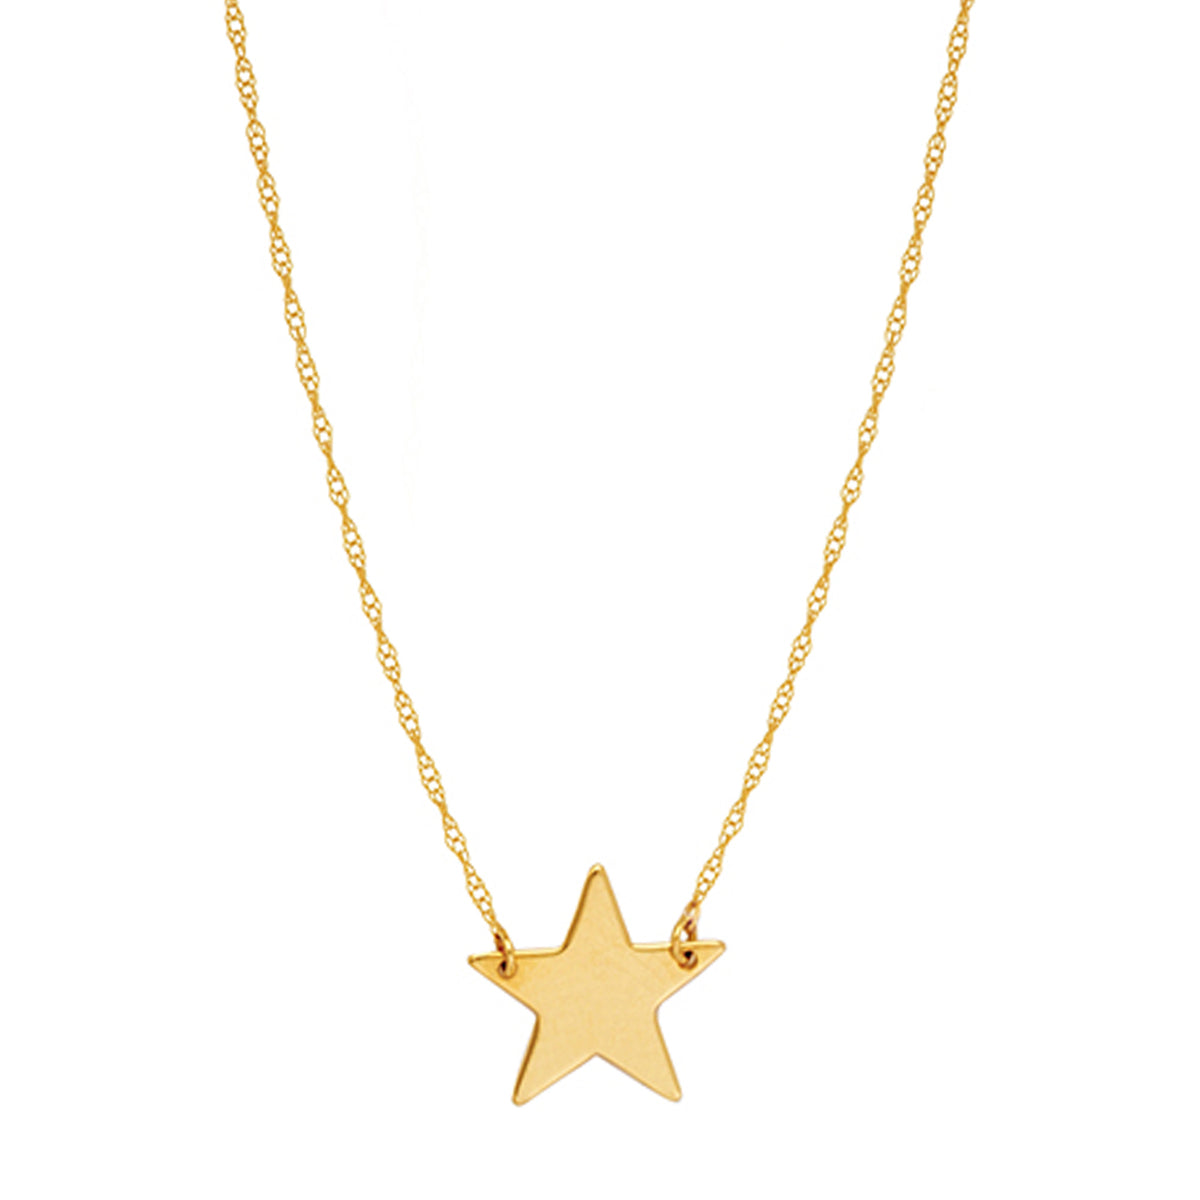 14K Yellow Gold Mini Star Pendant Necklace, 16" To 18" Adjustable fine designer jewelry for men and women